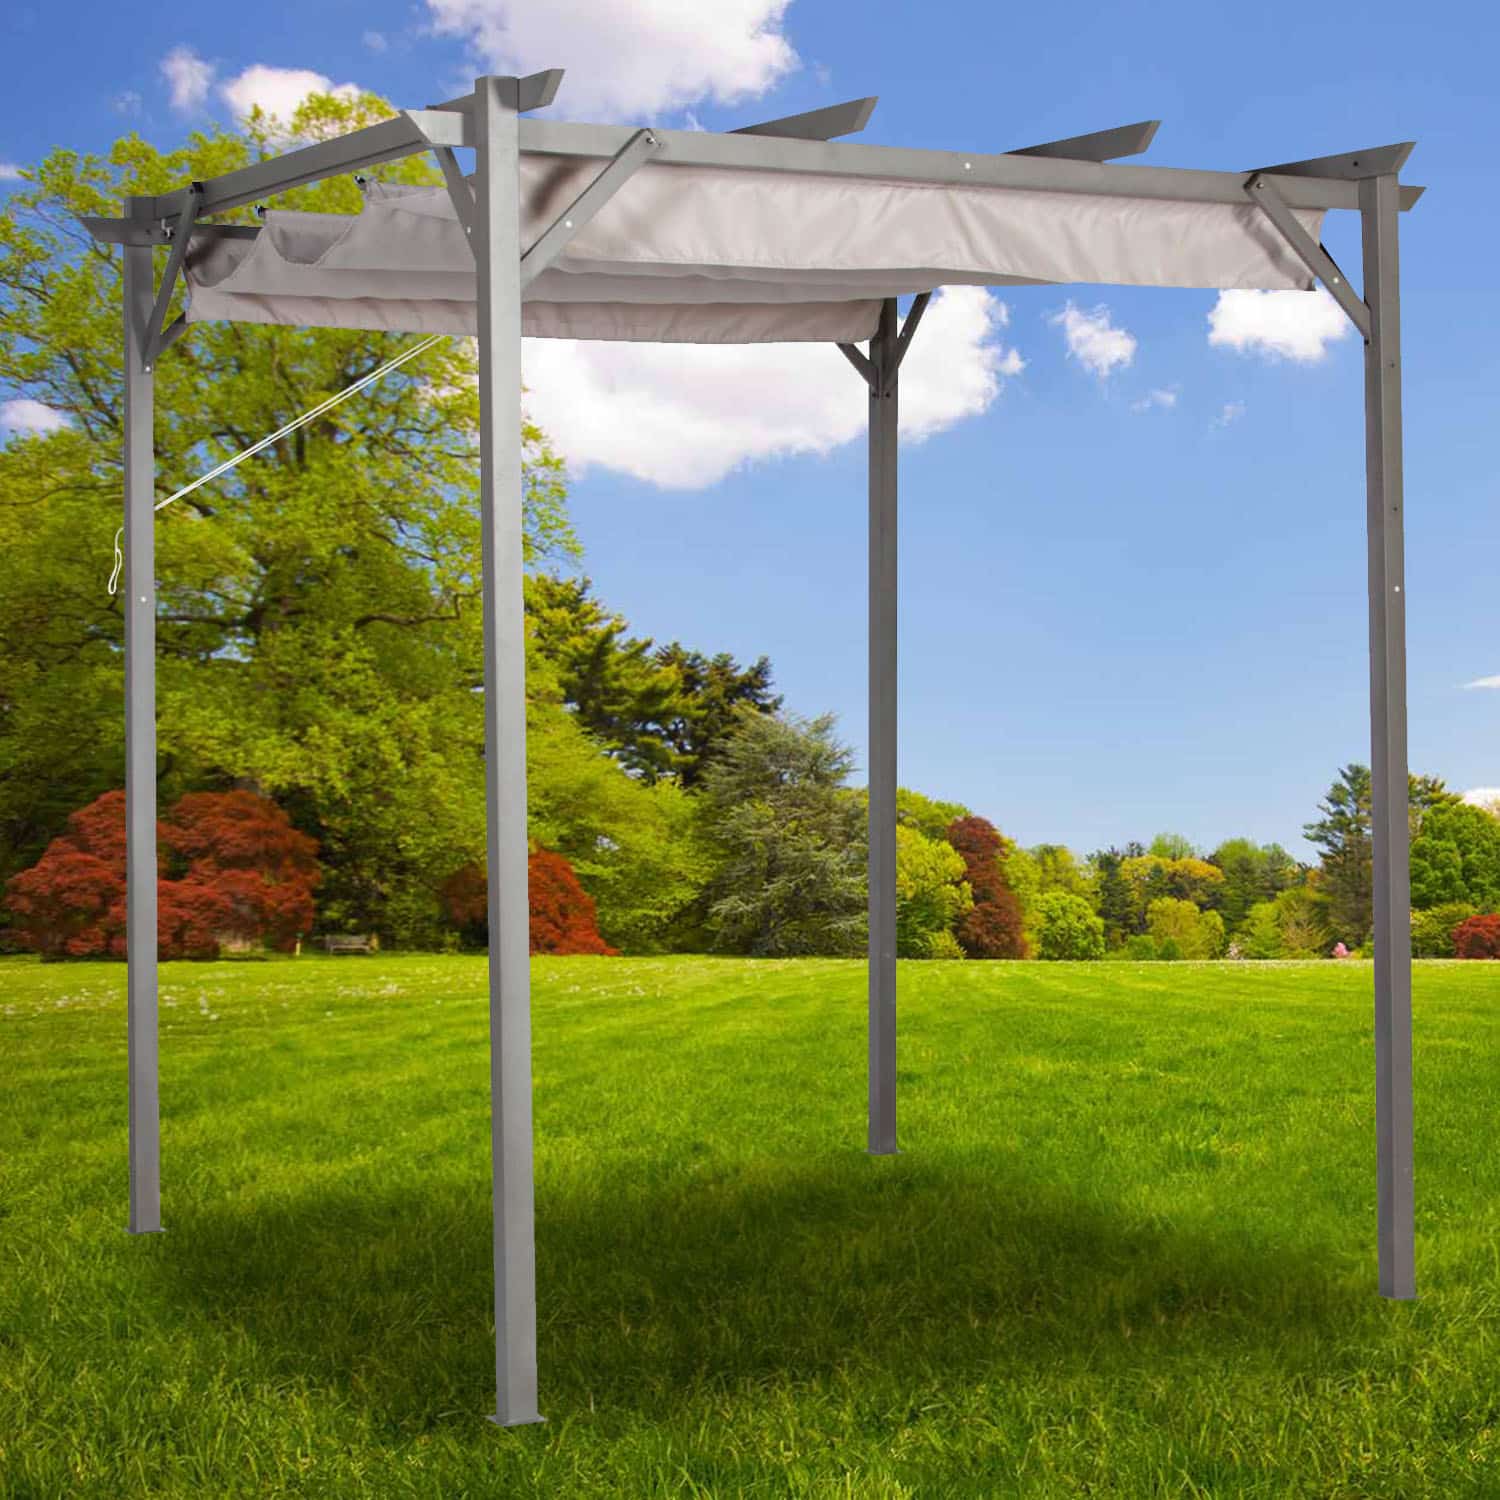 Garden Winds Replacement Canopy Top for Target 8x8 Pergola